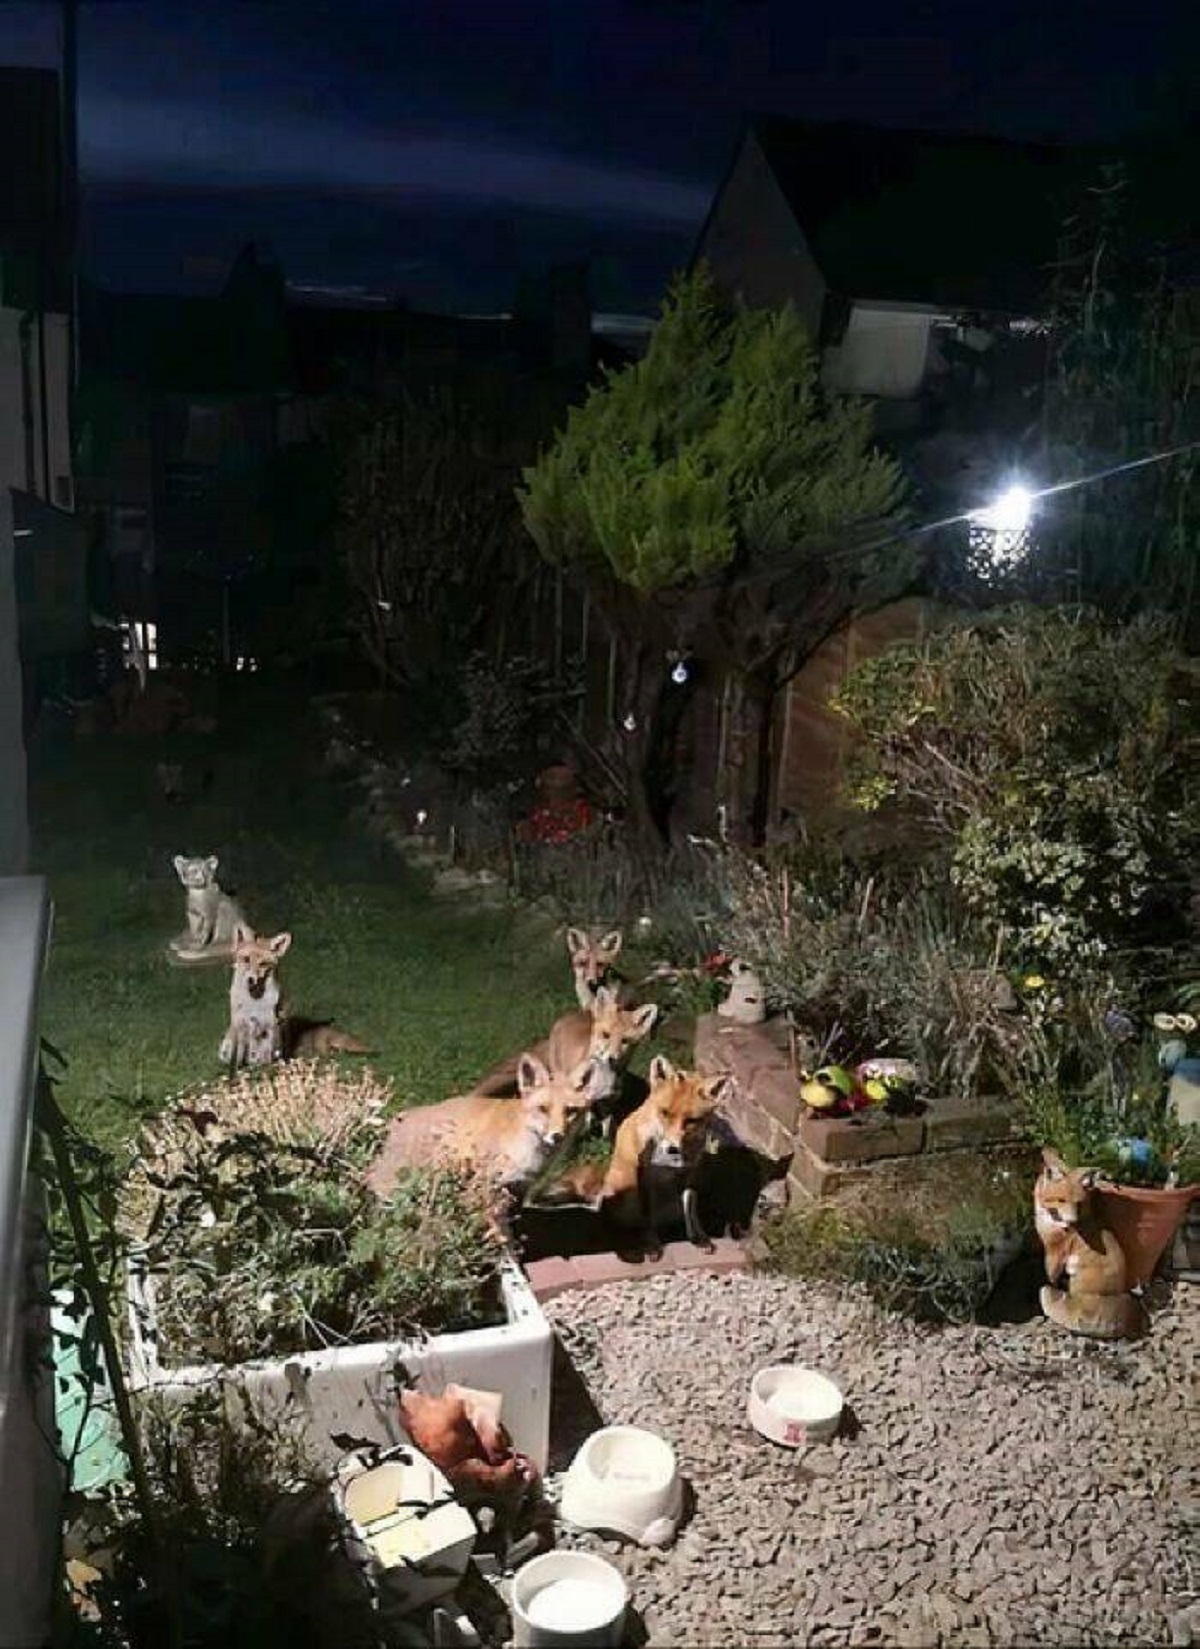 "I Make No Apologies For Another Fox Photo... This Was The Queue At The Foxy Café This Evening When I Gently Opened The Kitchen Door, I Am So Blessed"